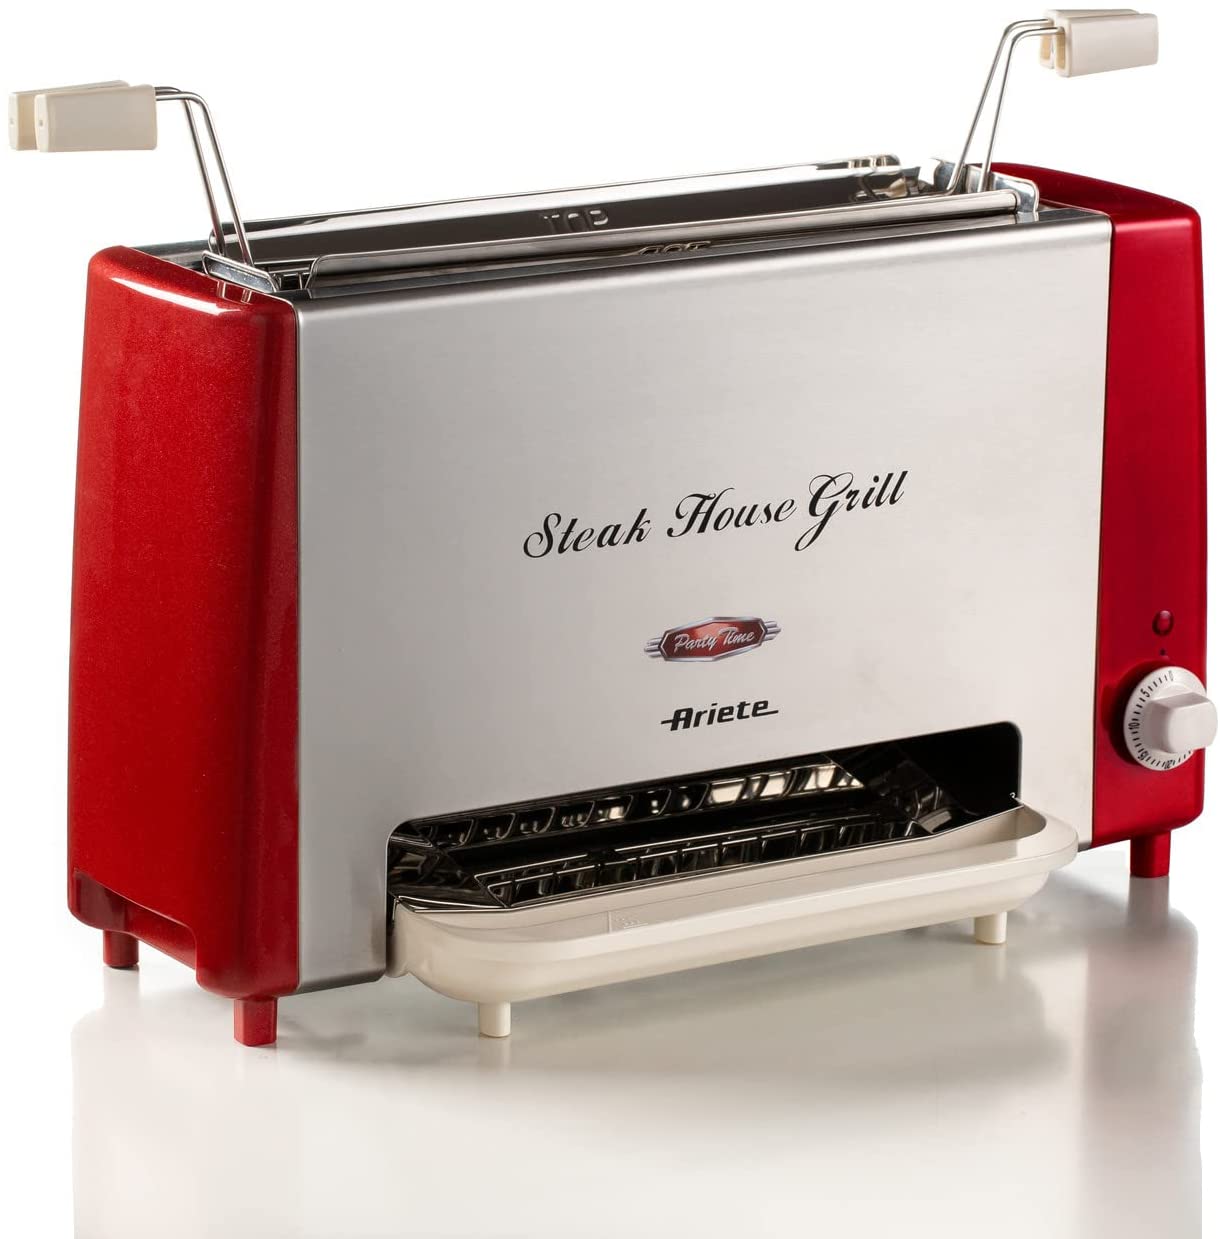 Ariete 730 Steakhouse Vertical Electric Grill, 1300 W, Grease Tray, Timer, Silver/Red